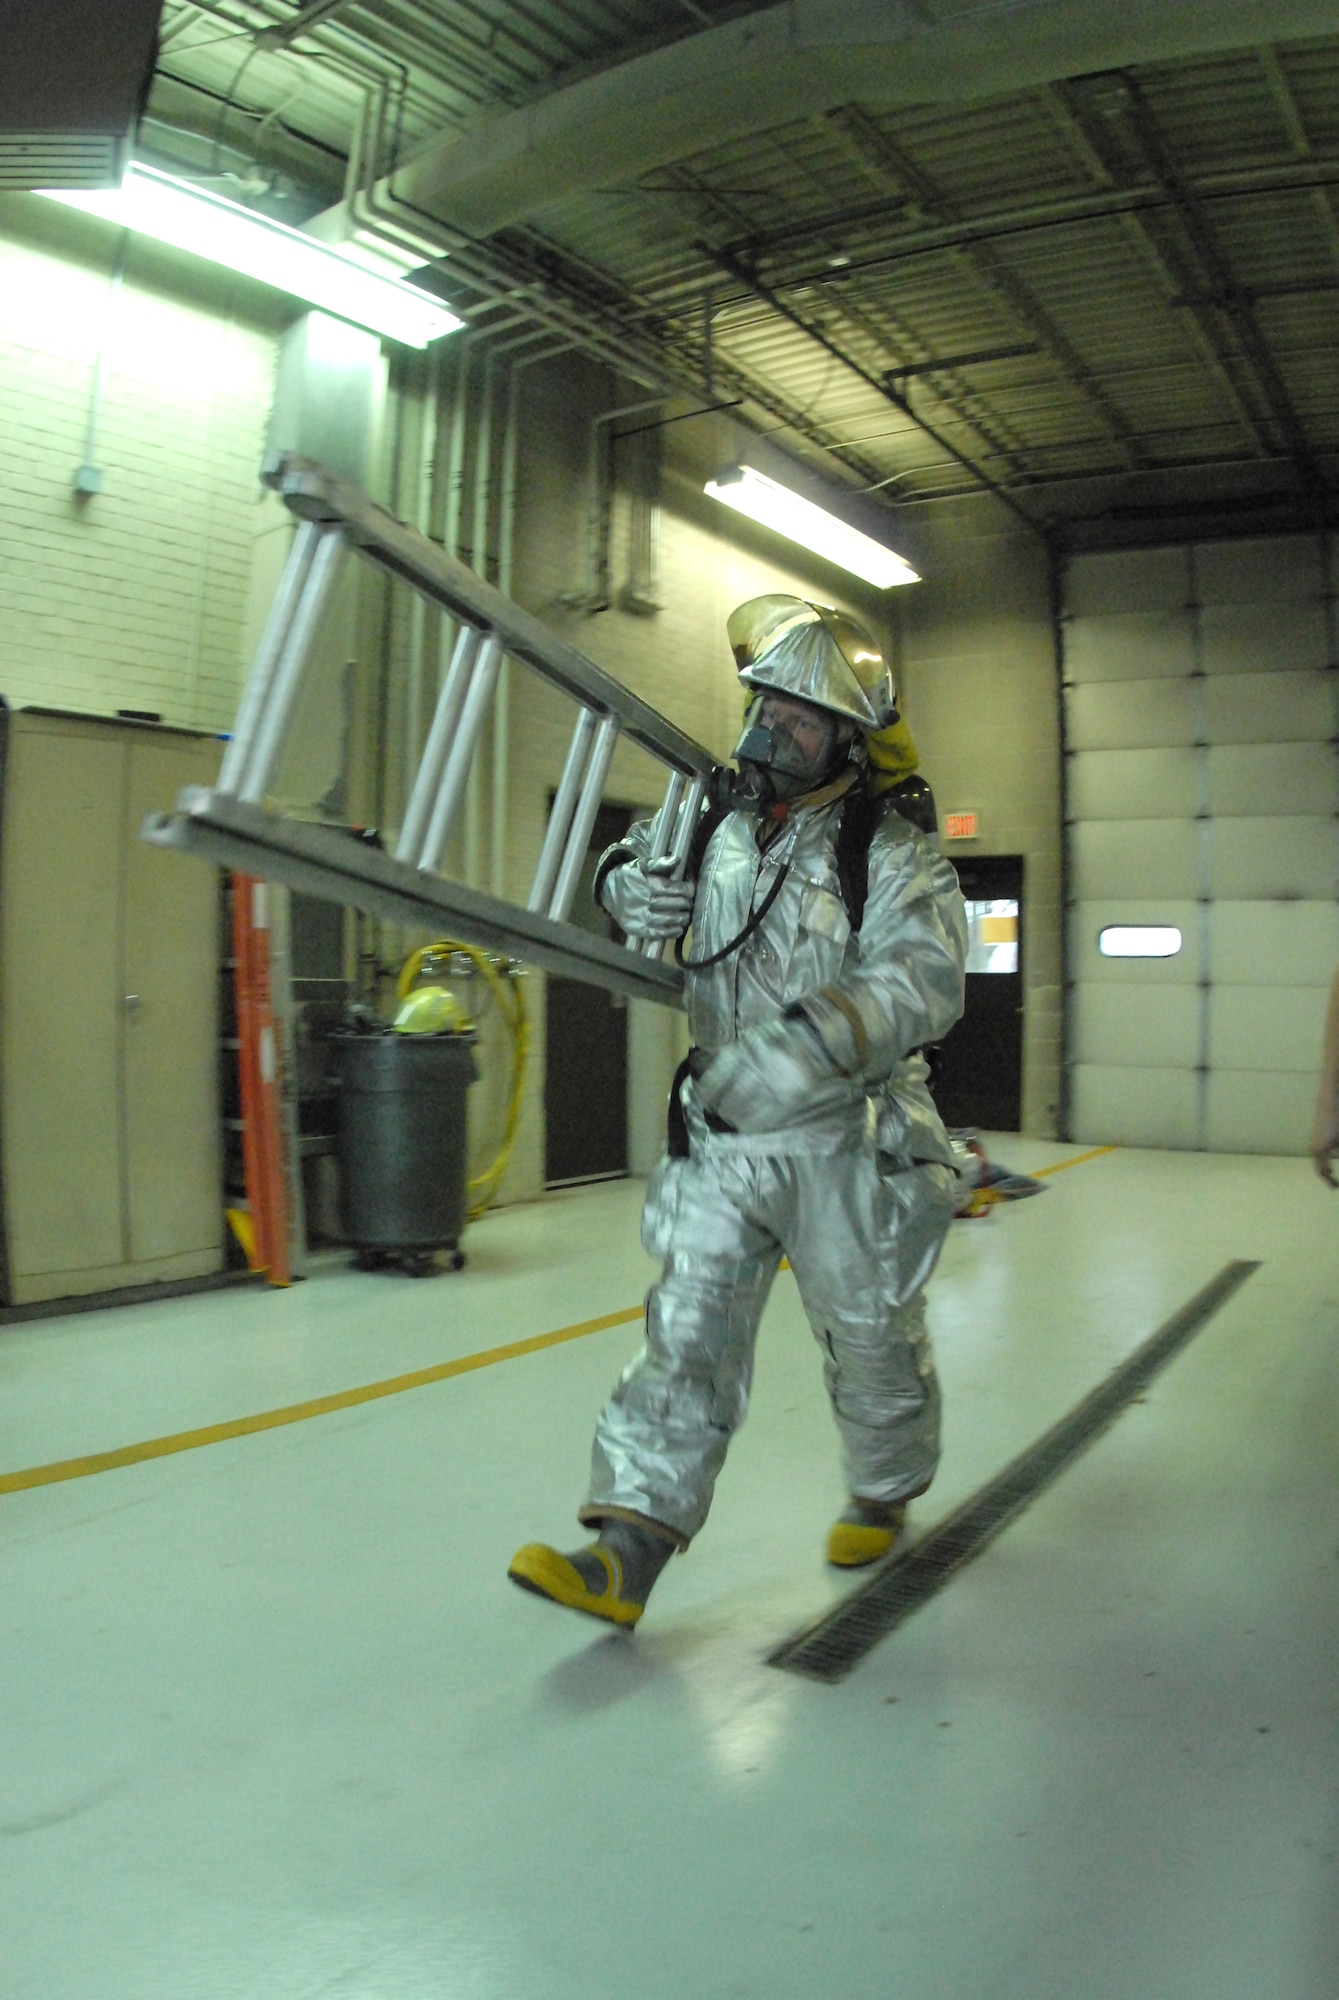 Tech Sgt. Tad R. Brown, a 119th Civil Engineer Squadron fire fighter, carries a ladder during a timed fire fighter fitness test Nov. 6 in the North Dakota Air National Guard fire hall on the east edge of the Hector International Airport runway, Fargo, N.D.  The fitness test is an annual requirement for the fire fighters and includes various obstacles designed to simulate challenges that they might encounter during fire fighting and fire victim rescue attempts.   (NDANG photo by Senior Master Sgt. David H. Lipp) (Released)
  
